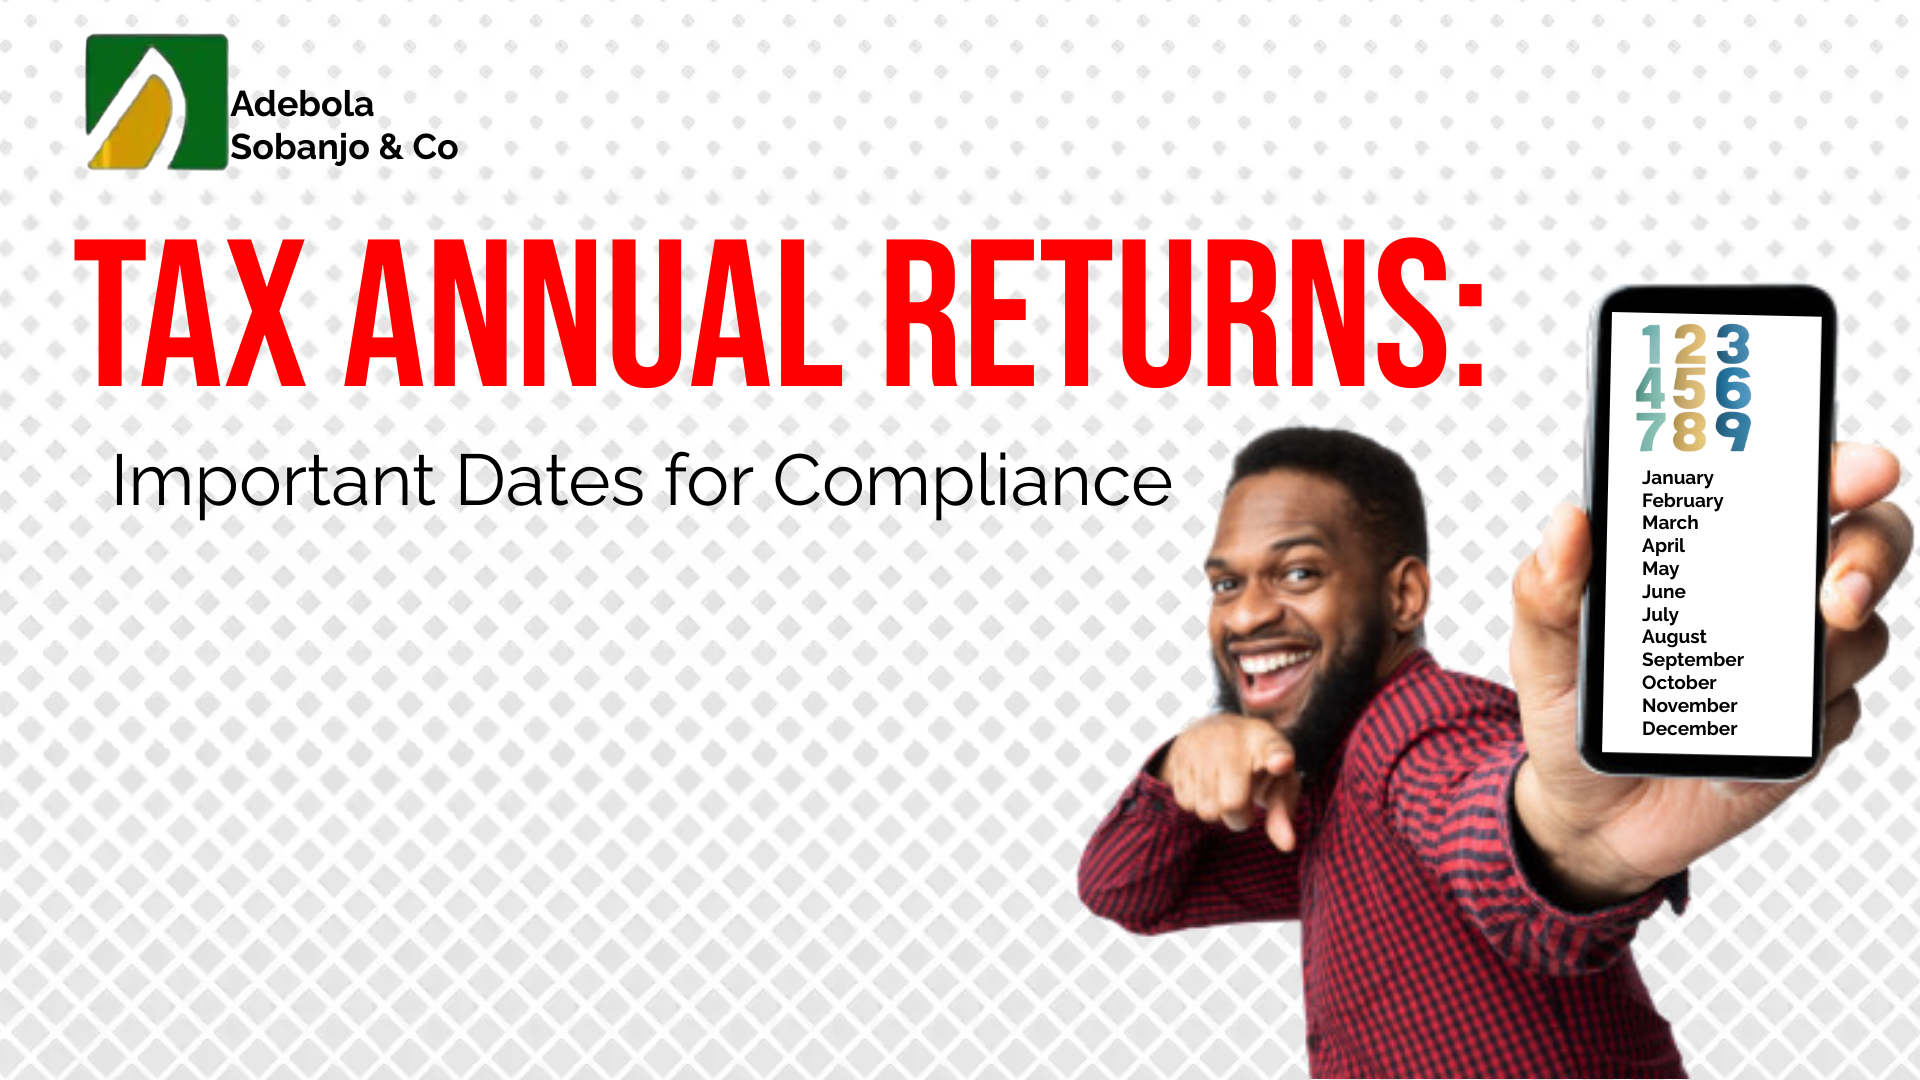 TAX ANNUAL RETURNS: Important Dates for Compliance